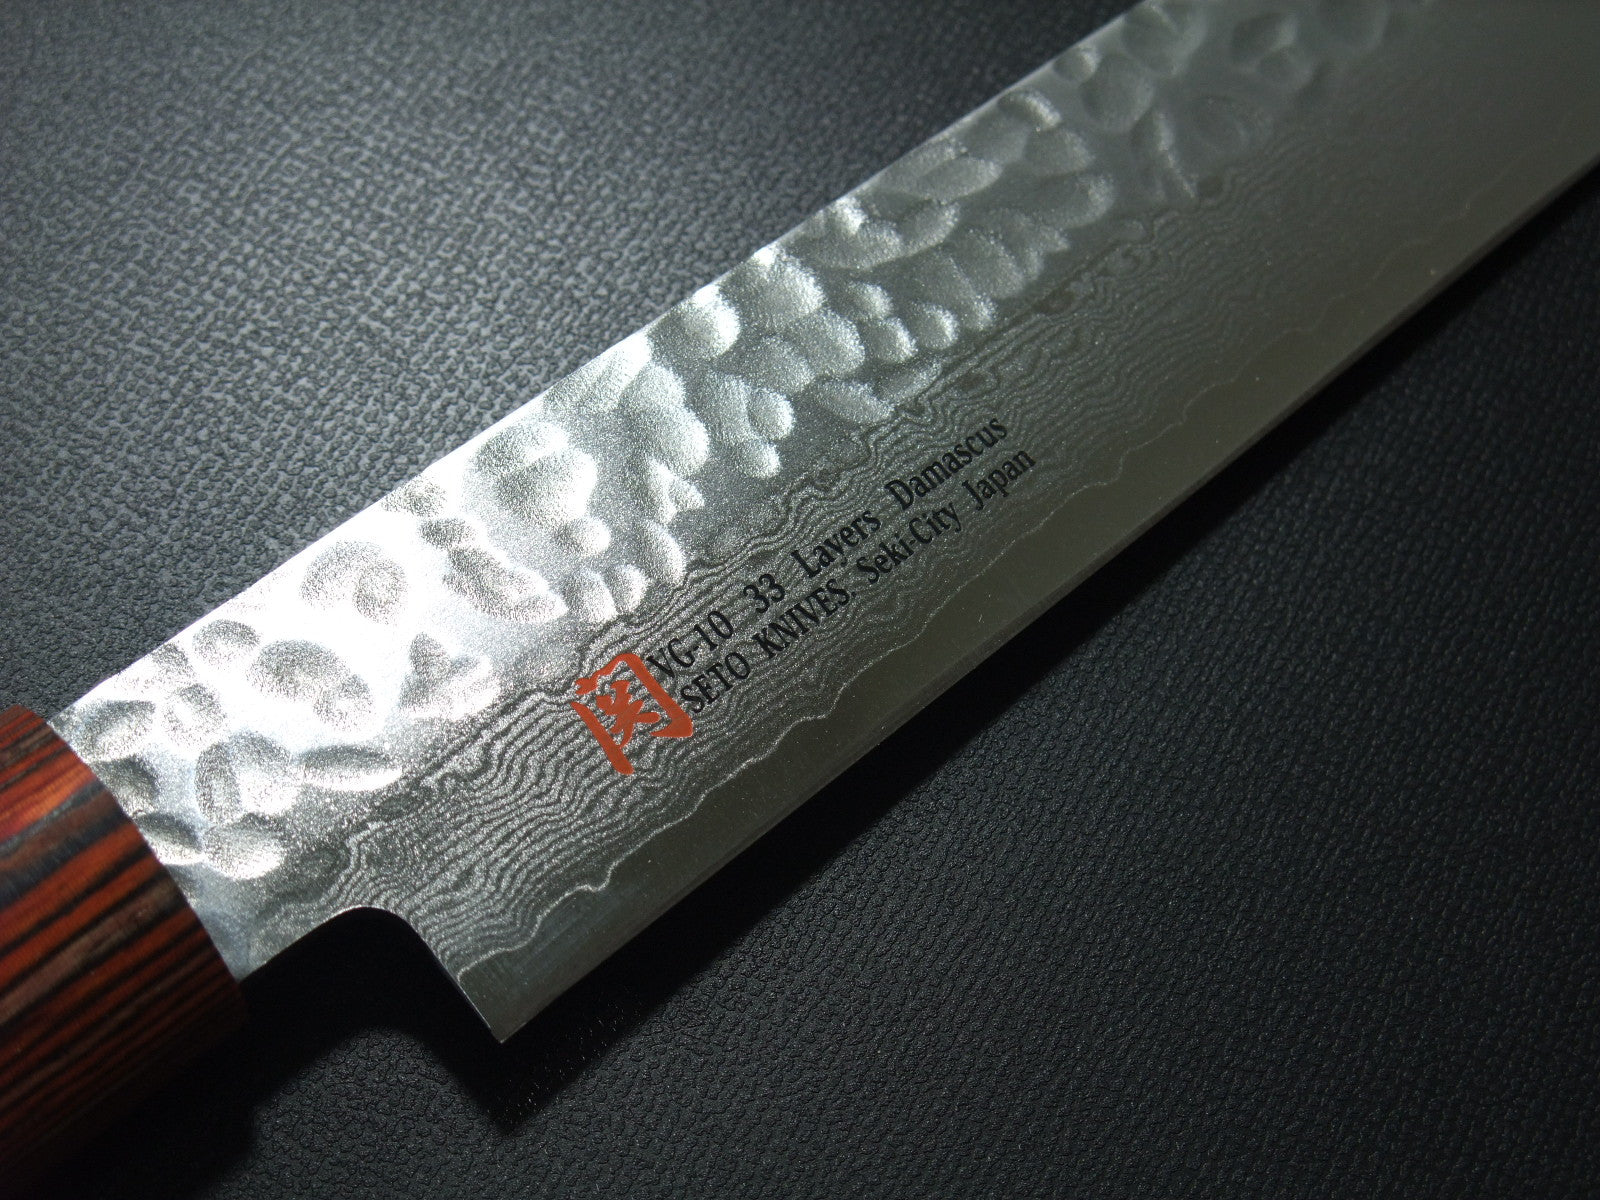 Great Japanese VG10 Damascus Knife Set for The Home Chefs Japan